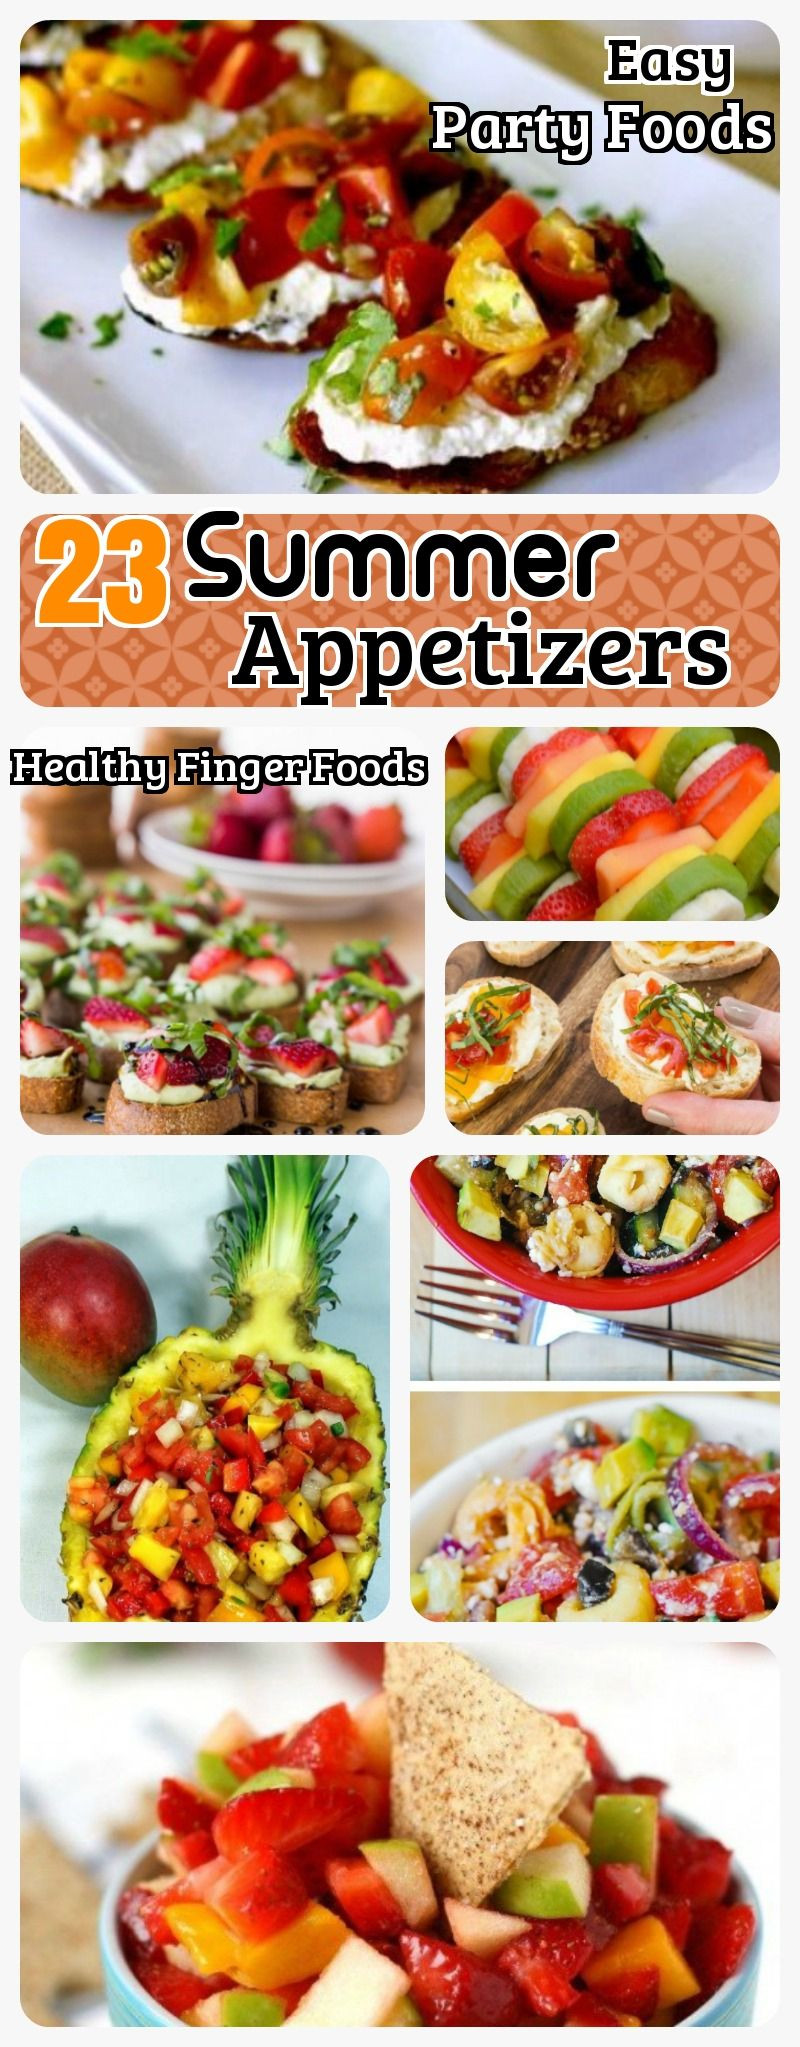 Summer Party Finger Food Ideas
 23 Summer appetizers for Scorching Summer Easy Healthy